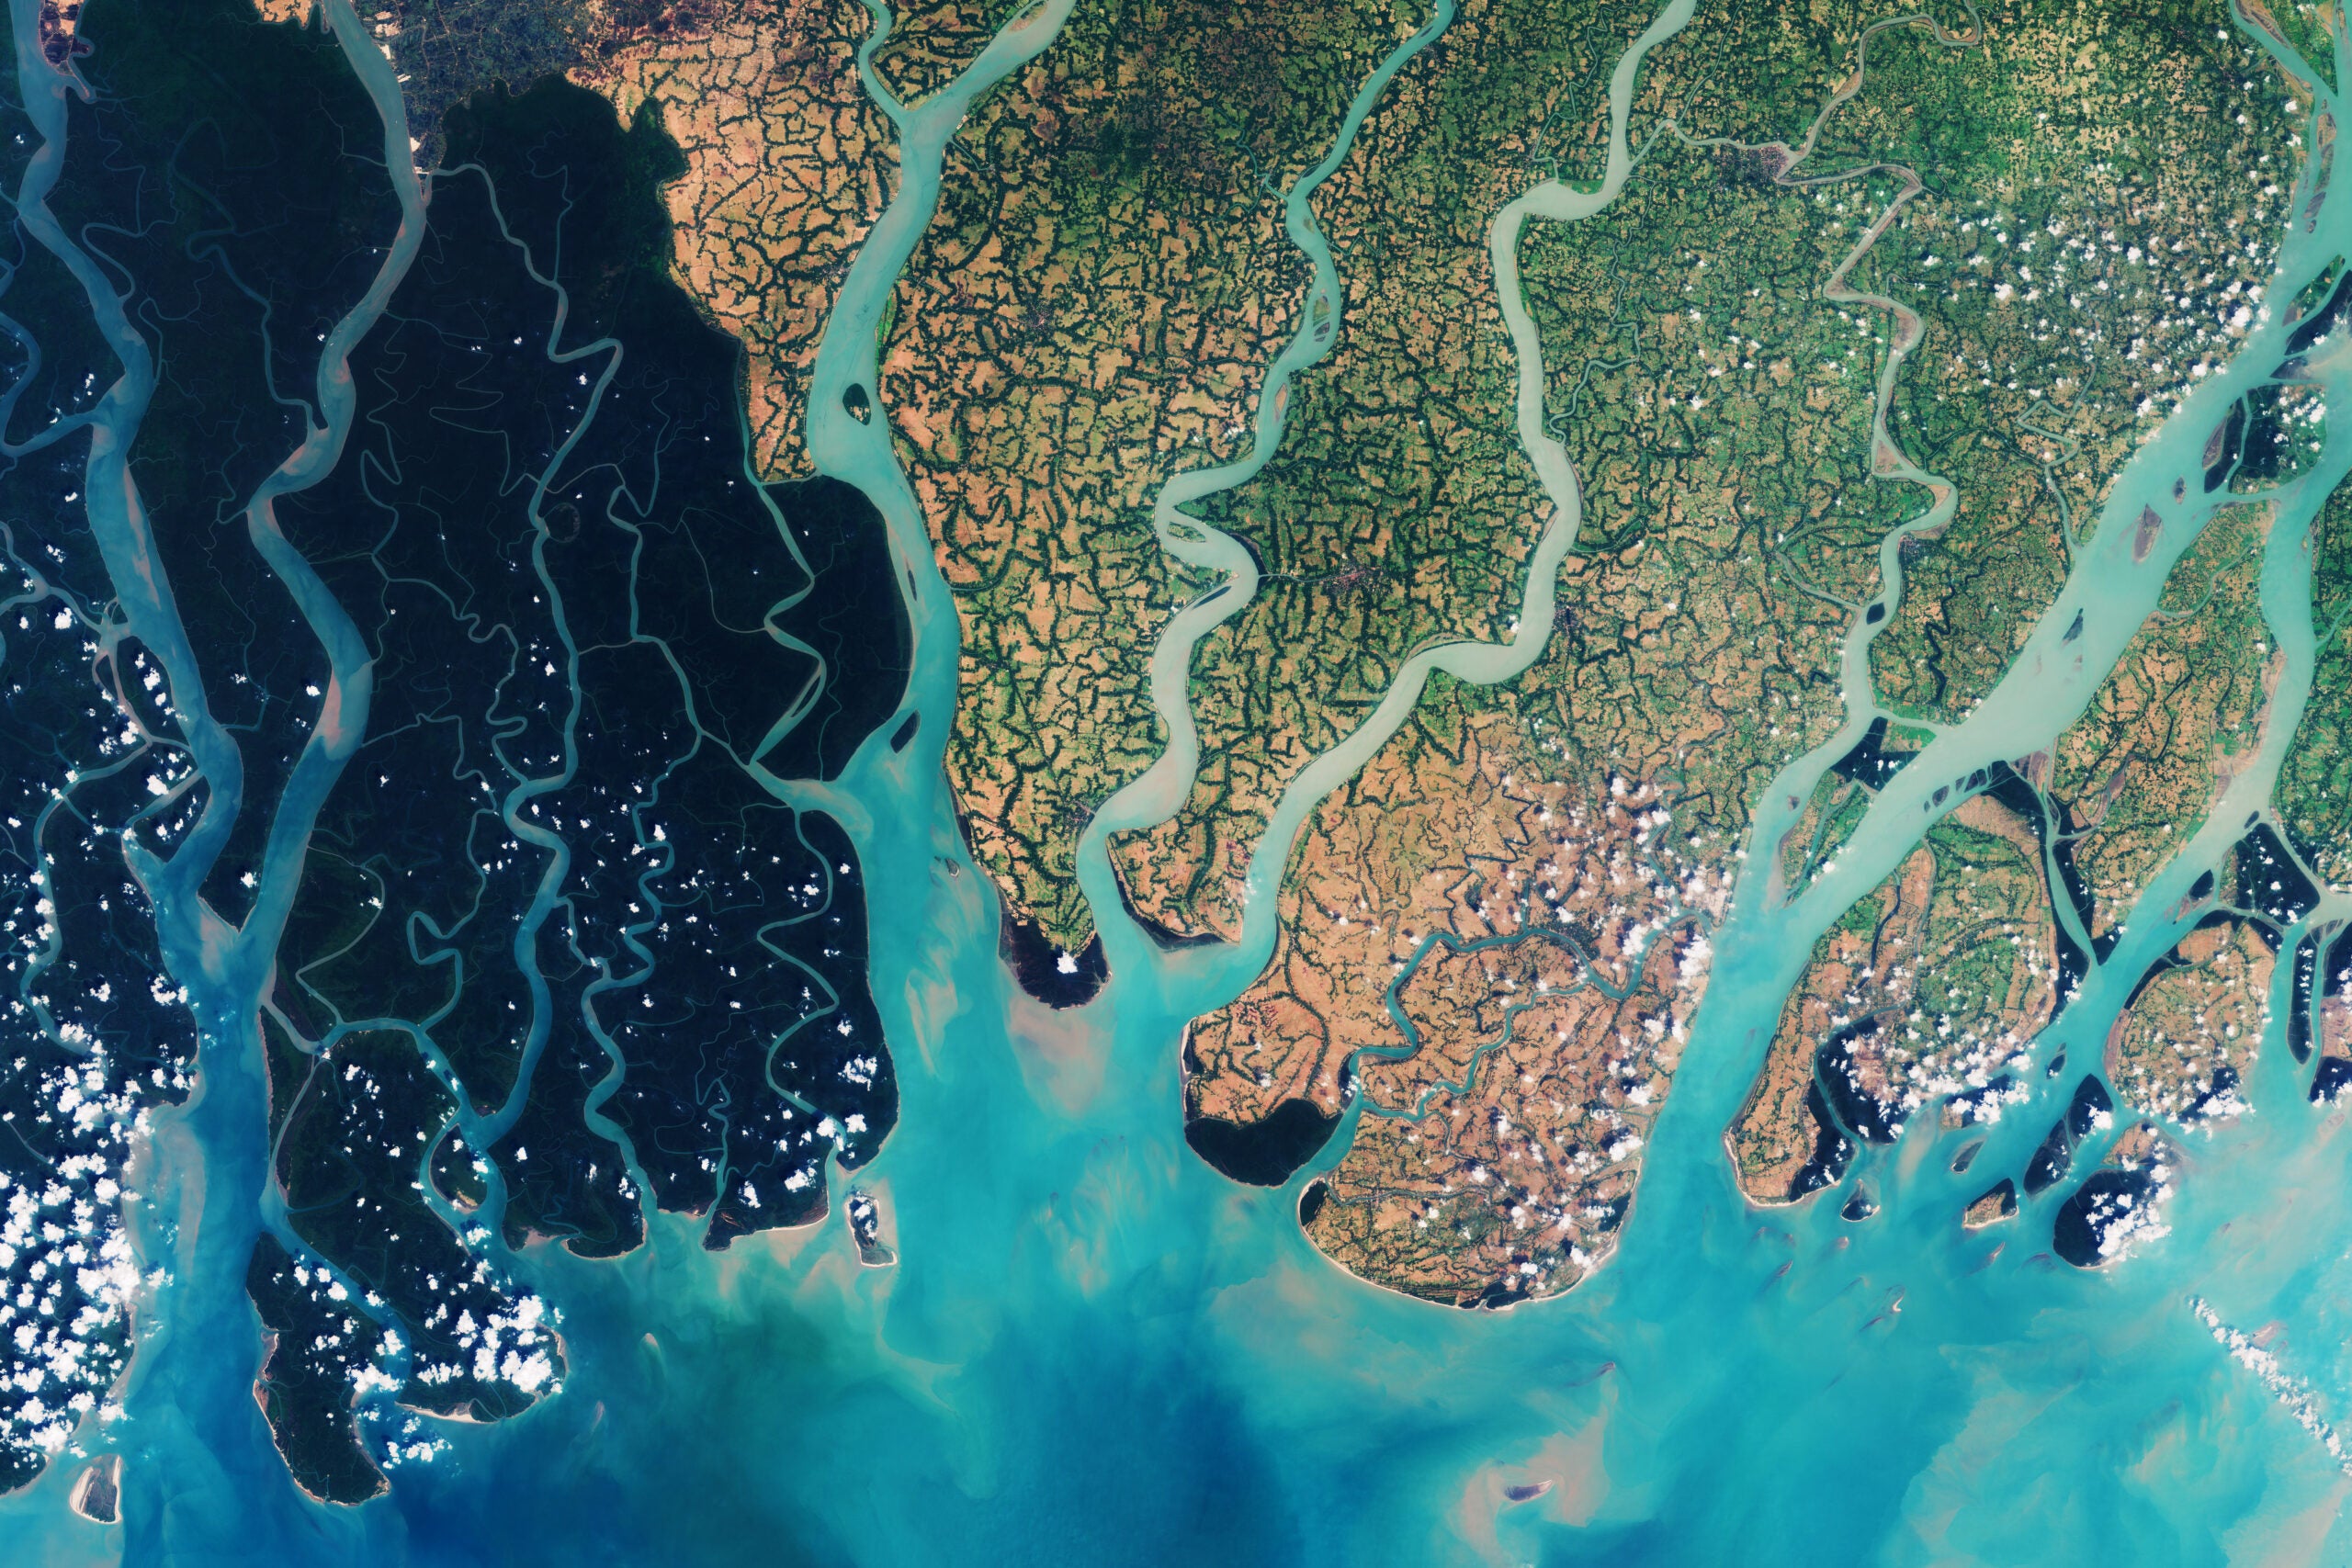 The Sundarbans mangrove forest as seen from outer space.